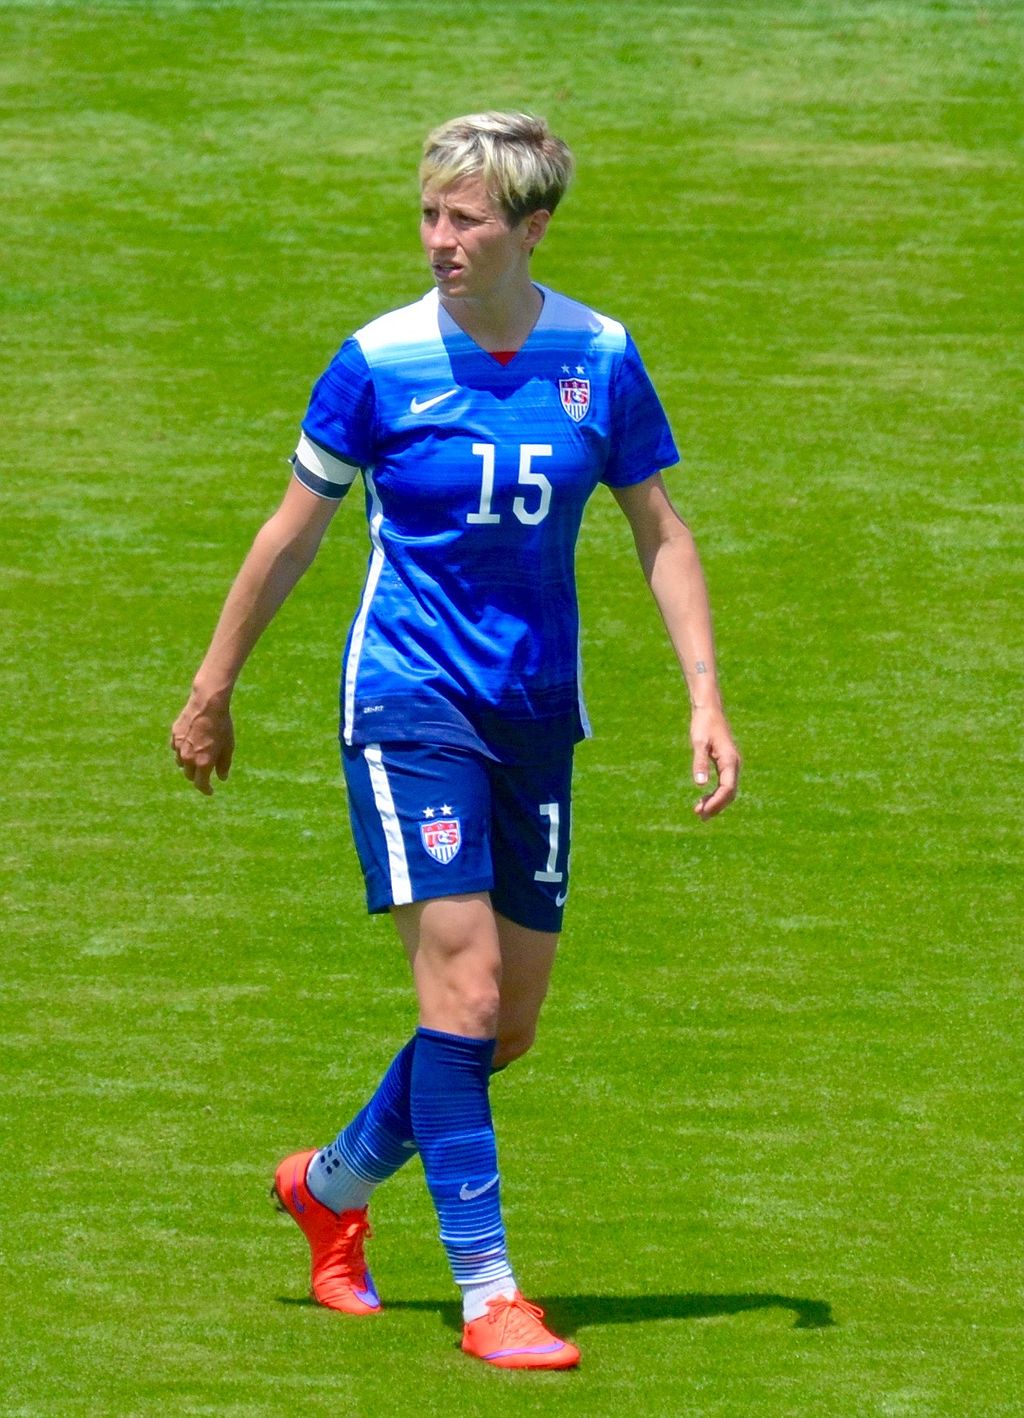 "Megan Rapinoe playing for the US Women's National Team in San Jose, California on 10 May 2015."